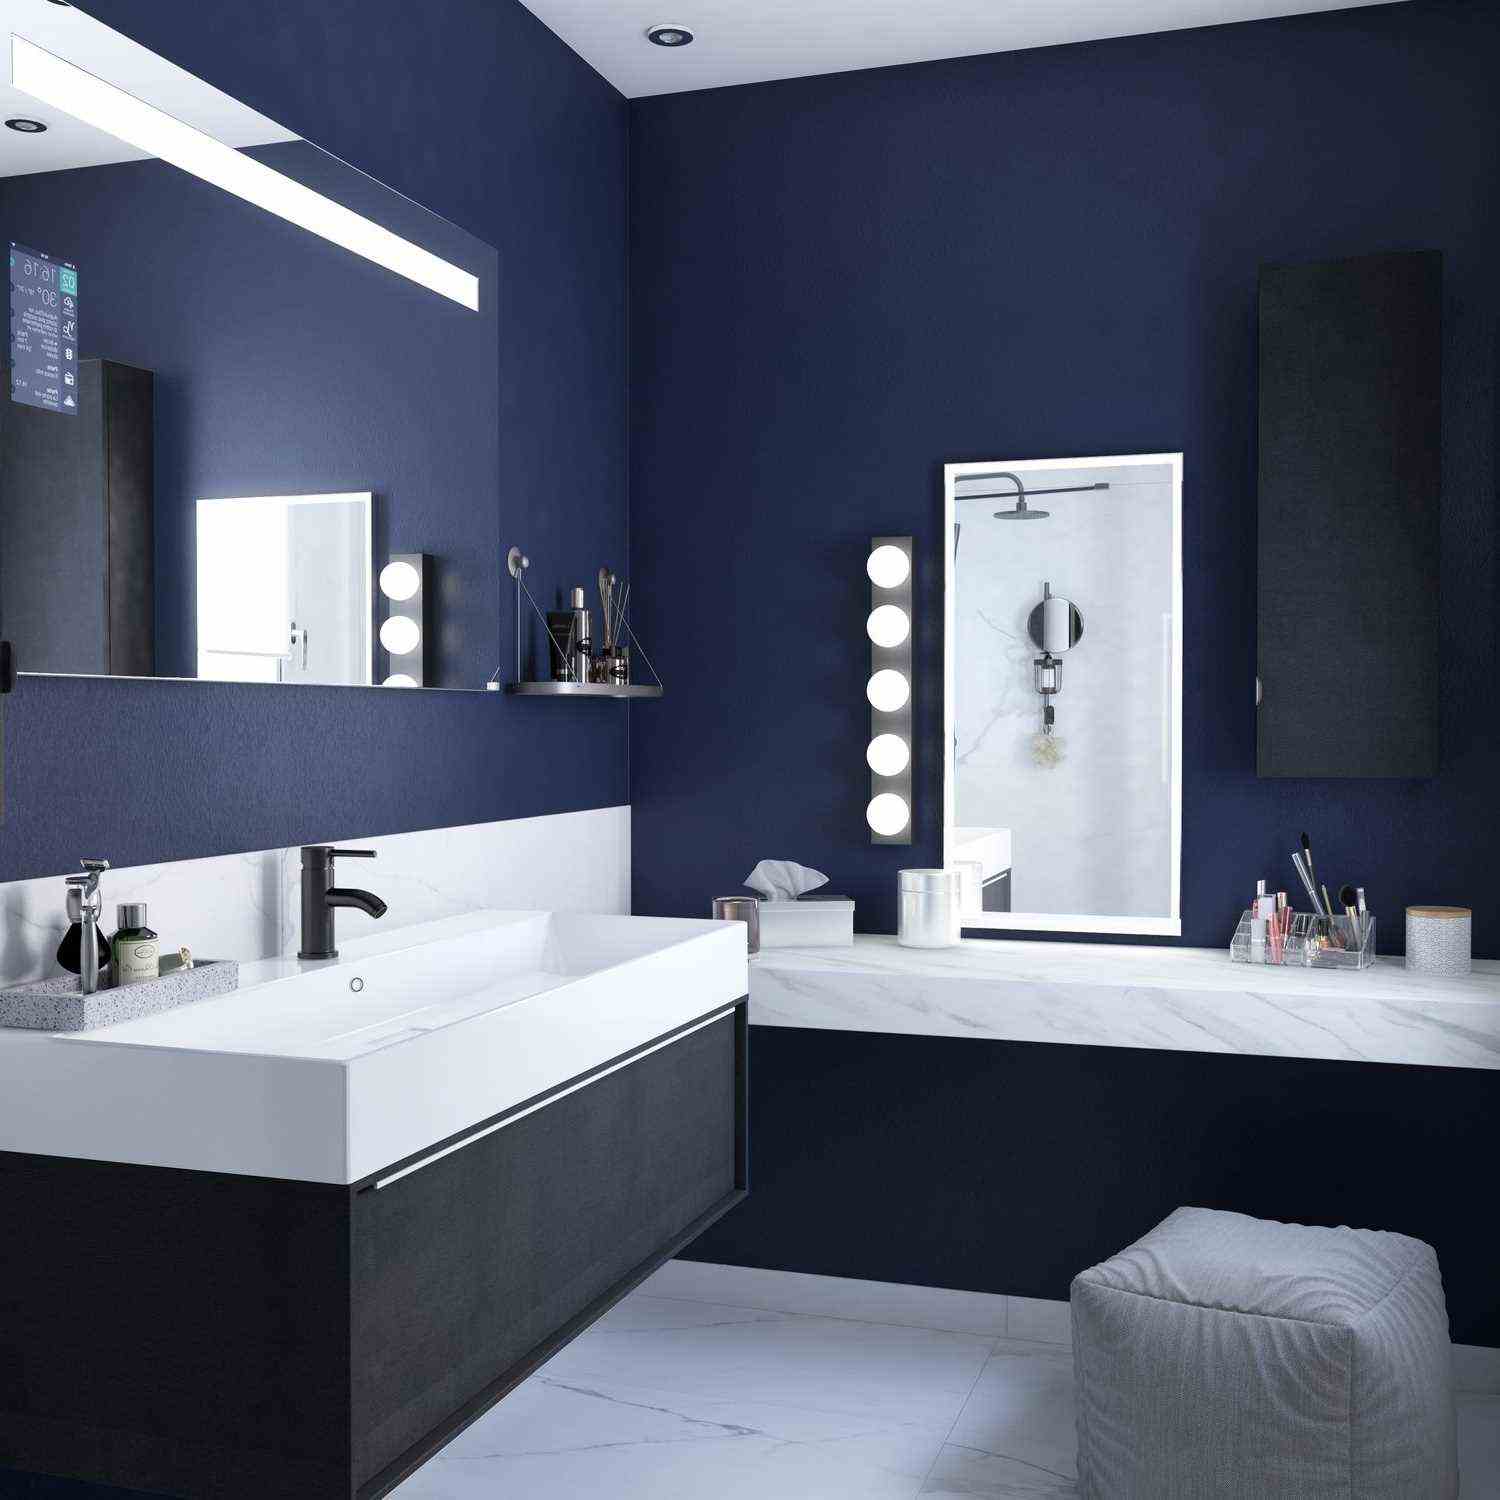 Daring Dark Blue By Working With Light 